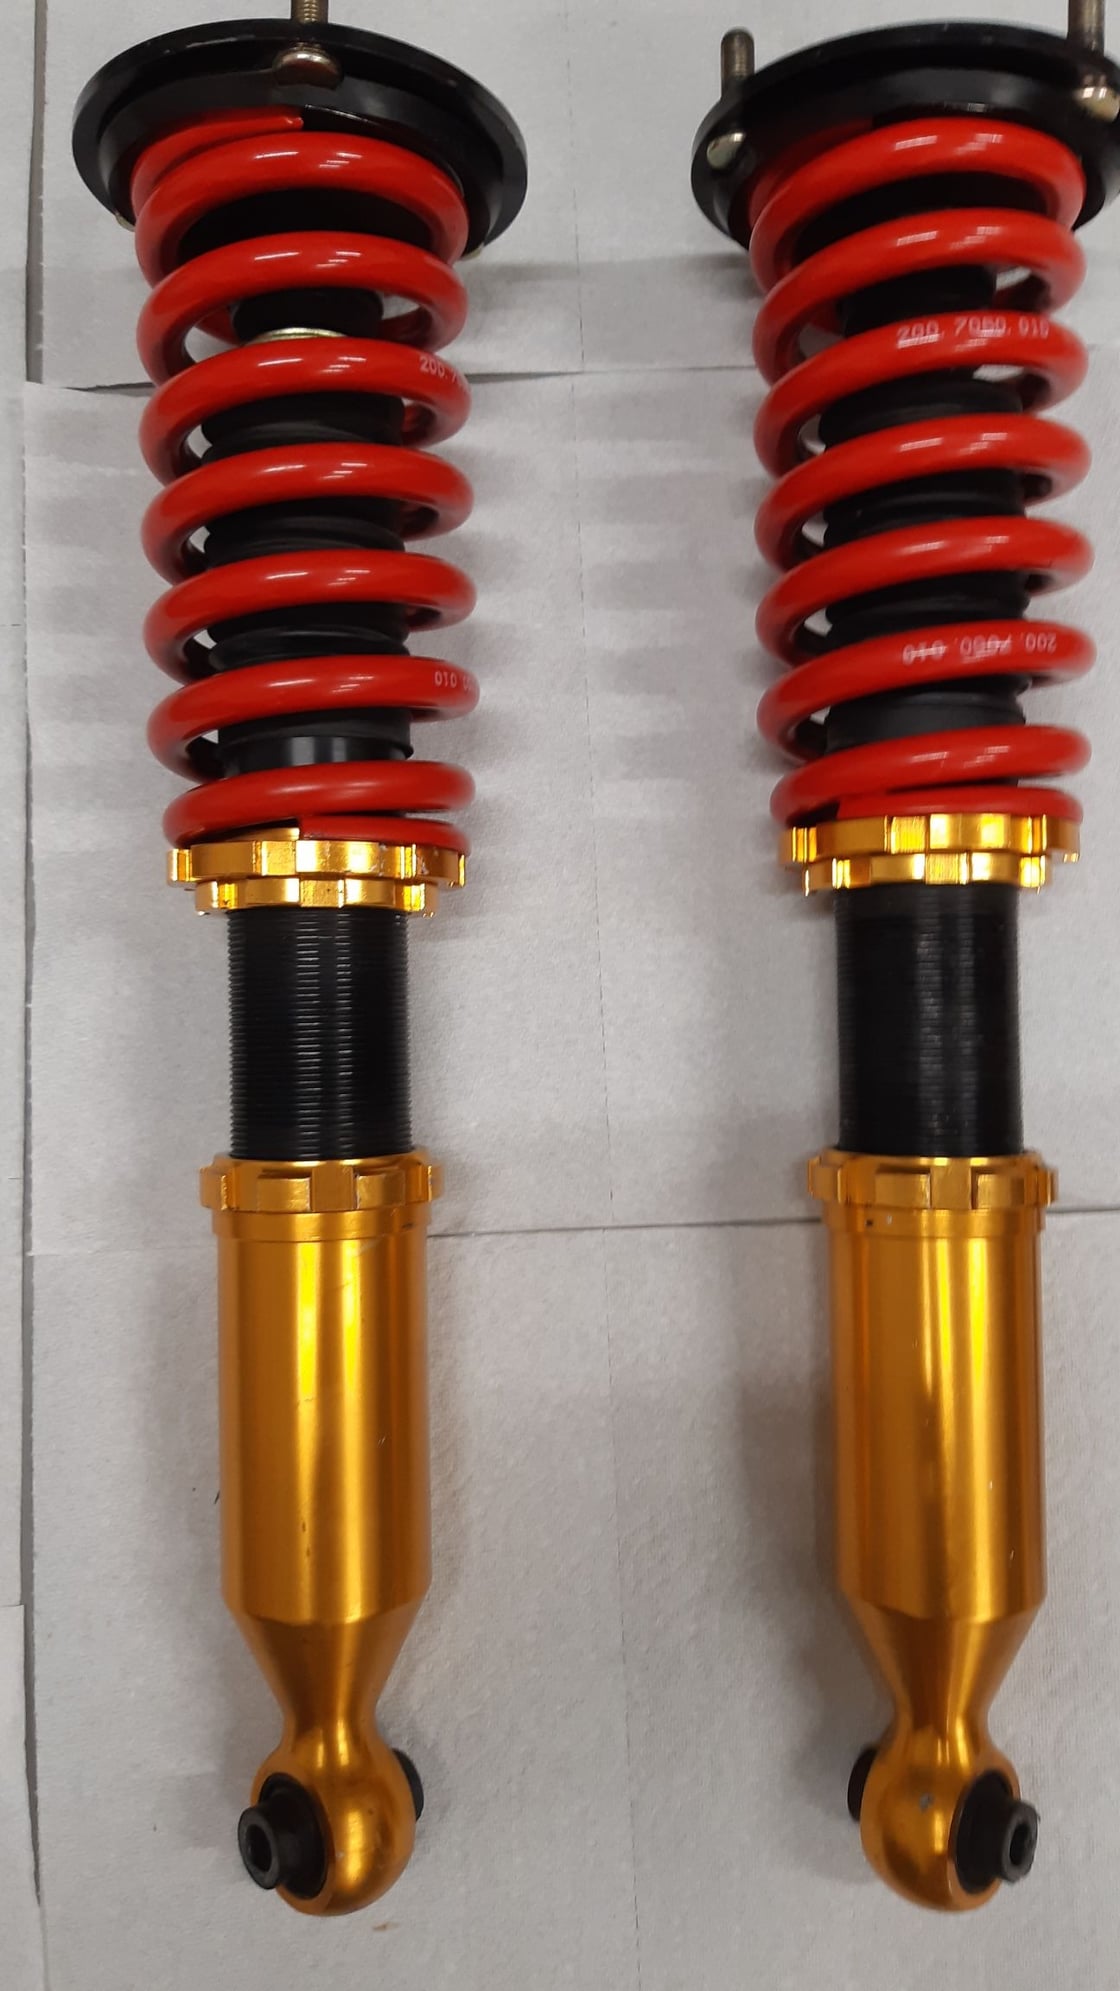 Steering/Suspension - Trak Pro Coilovers Stage II - 10/8 - Price Drop! - Used - 1992 to 1994 Mazda RX-7 - St. Catharines, ON L2S4B5, Canada